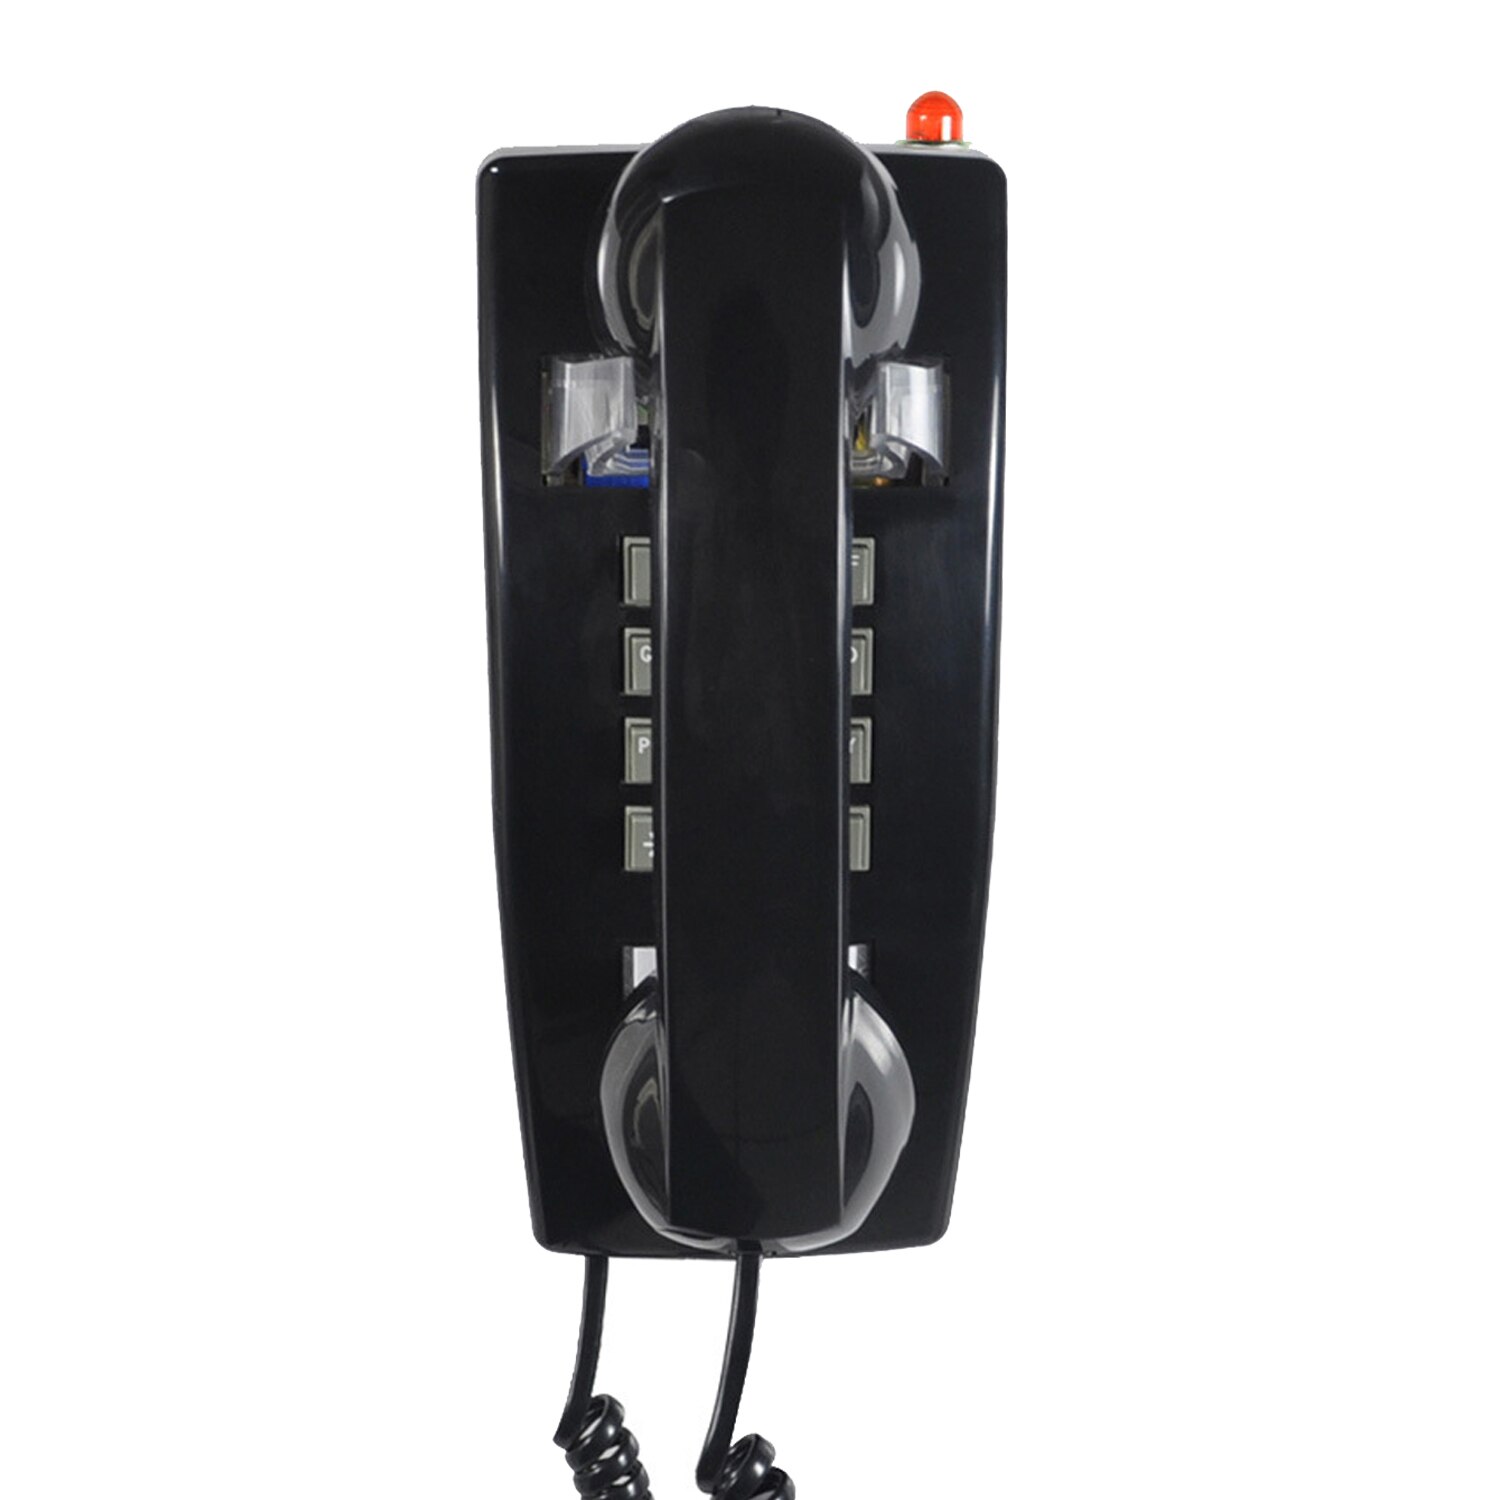 Corded Wall Phone, Analog Wall Mount Phone With Cord, Vintage Wall Mounted Telephones Landline With Loud Traditional Phone Ring: Black Telephone